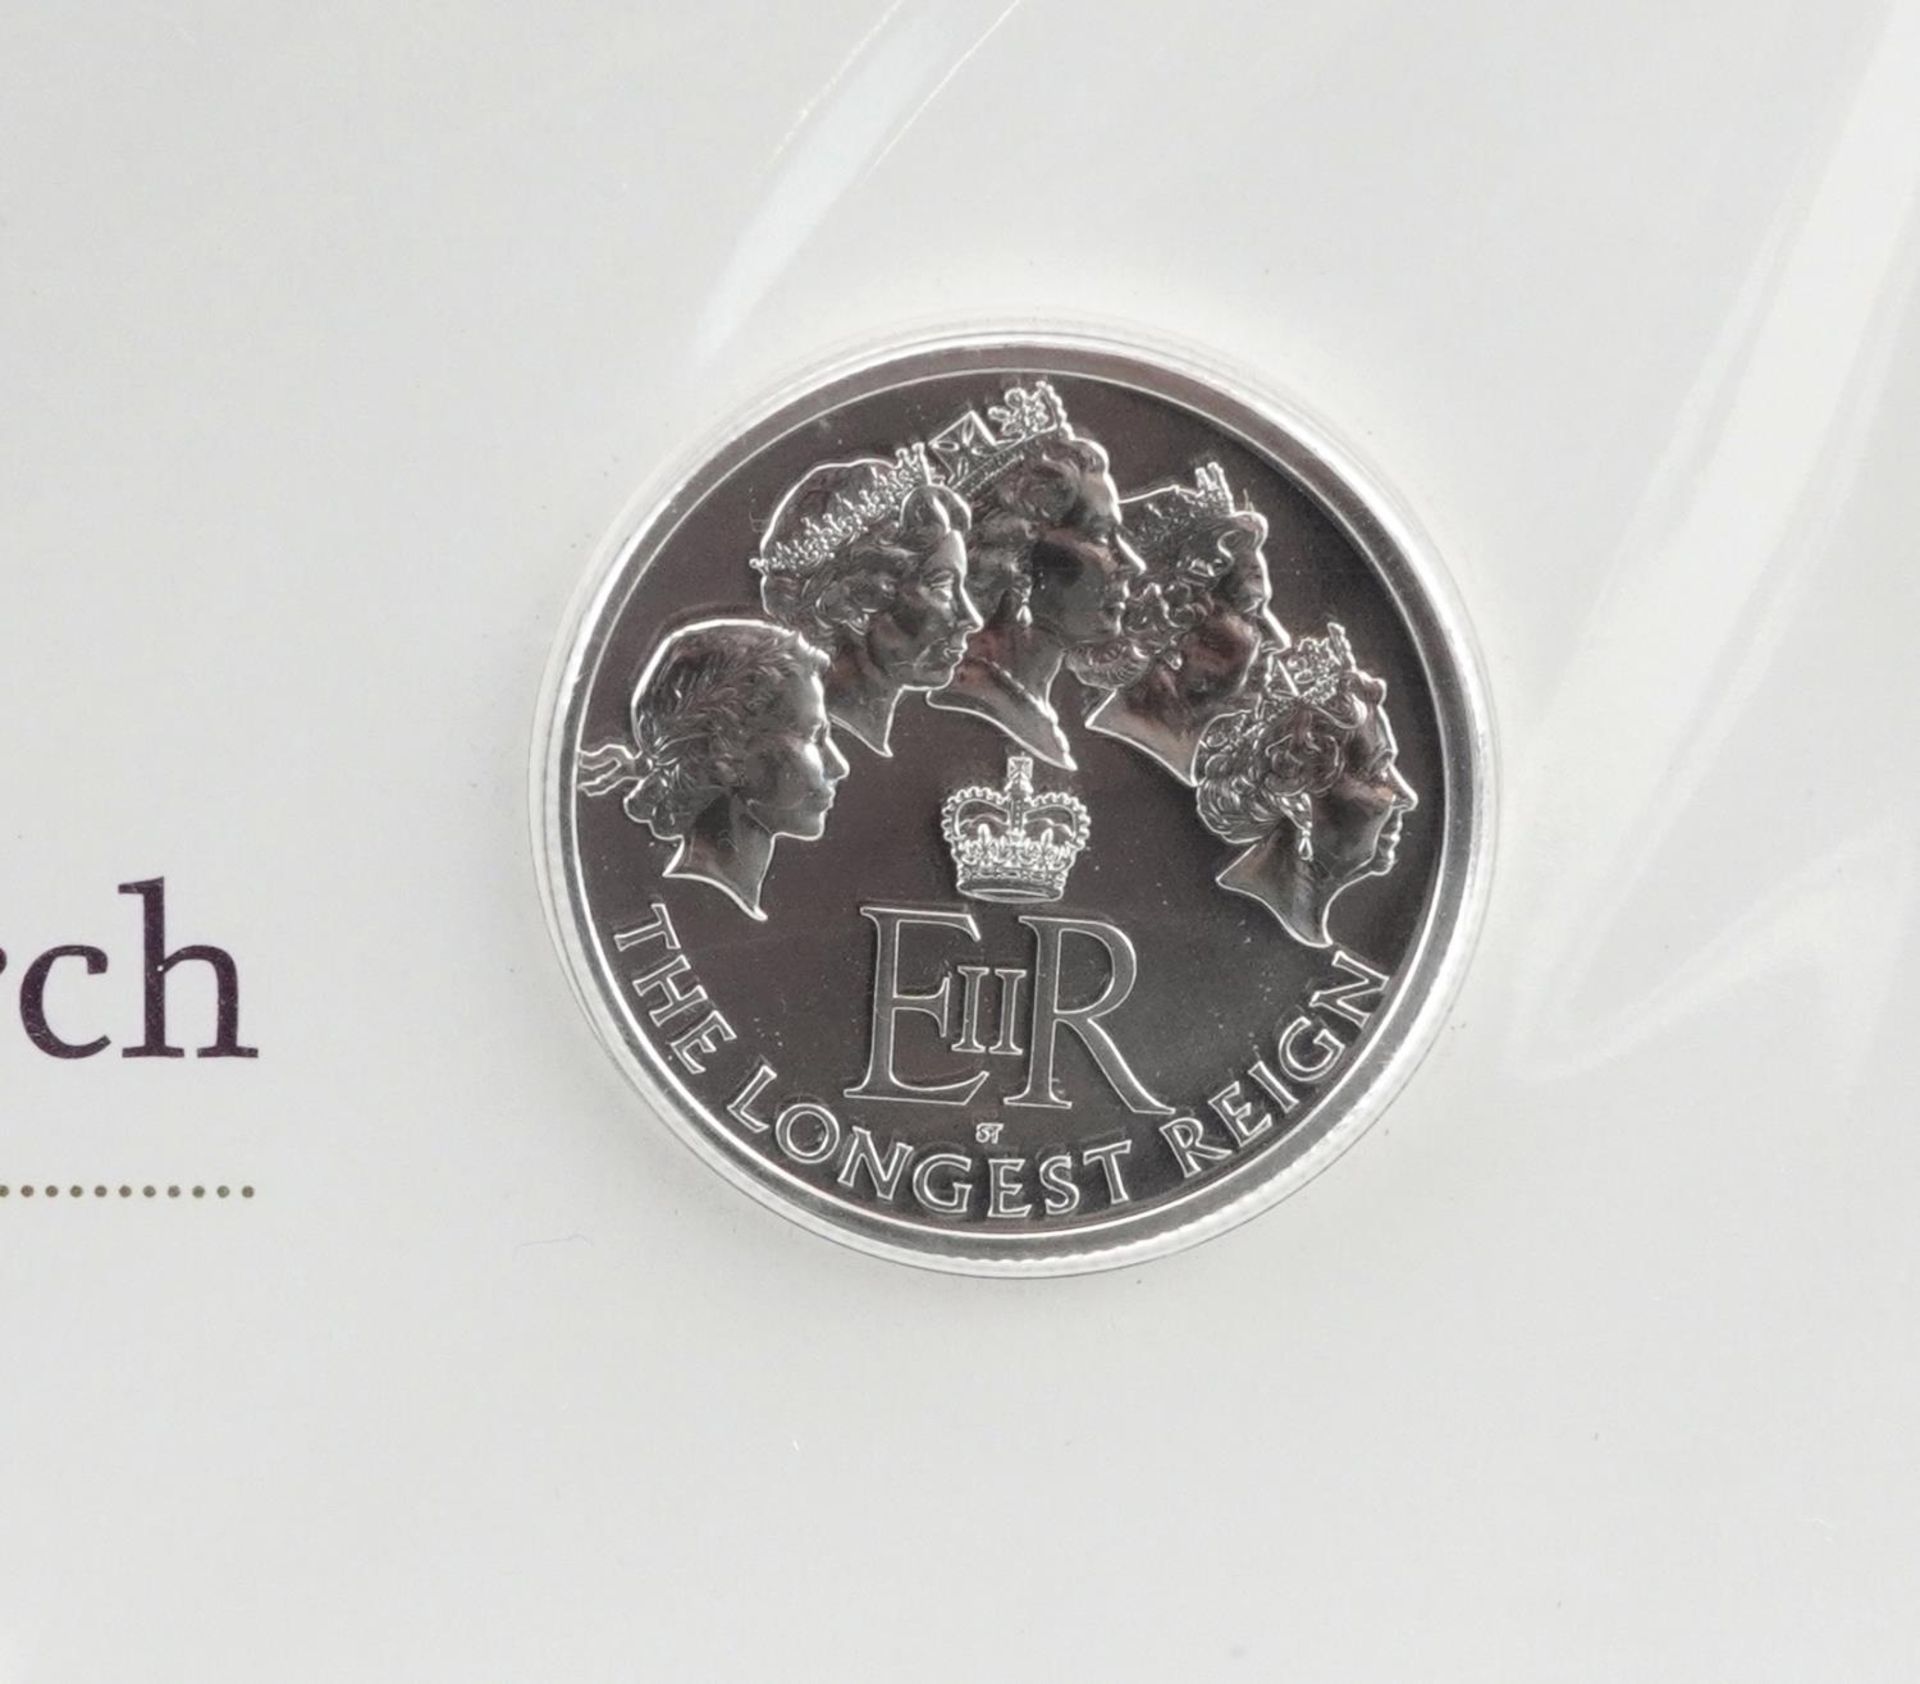 Five Elizabeth II 2015 Longest Reigning Monarch fine silver coins by The Royal Mint - Image 2 of 4